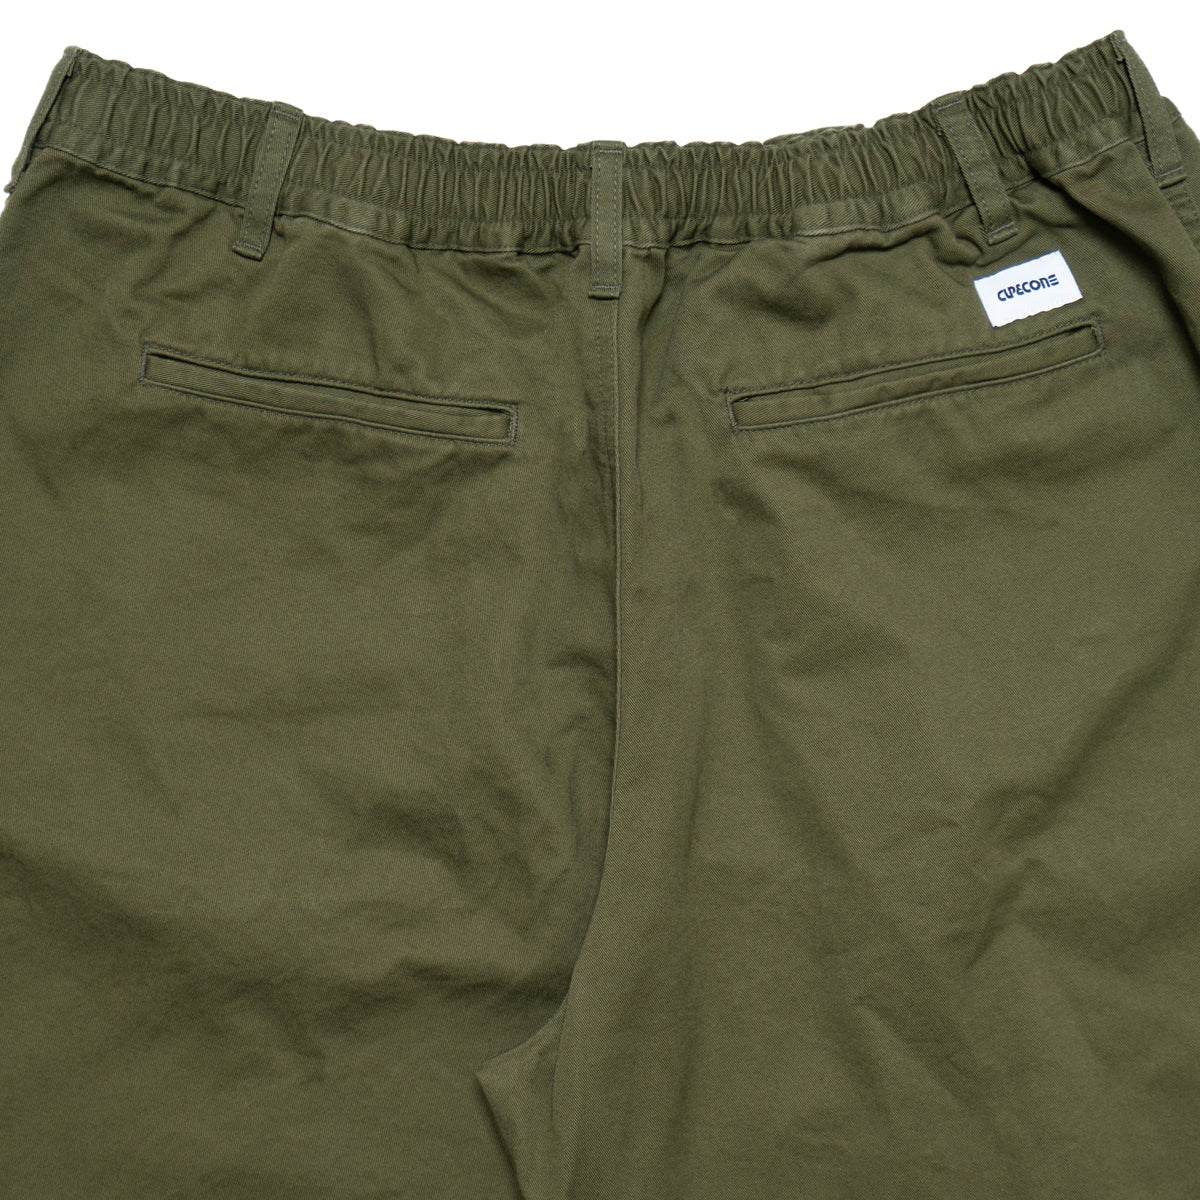 Cotton Twill Baggy Pants - Olive